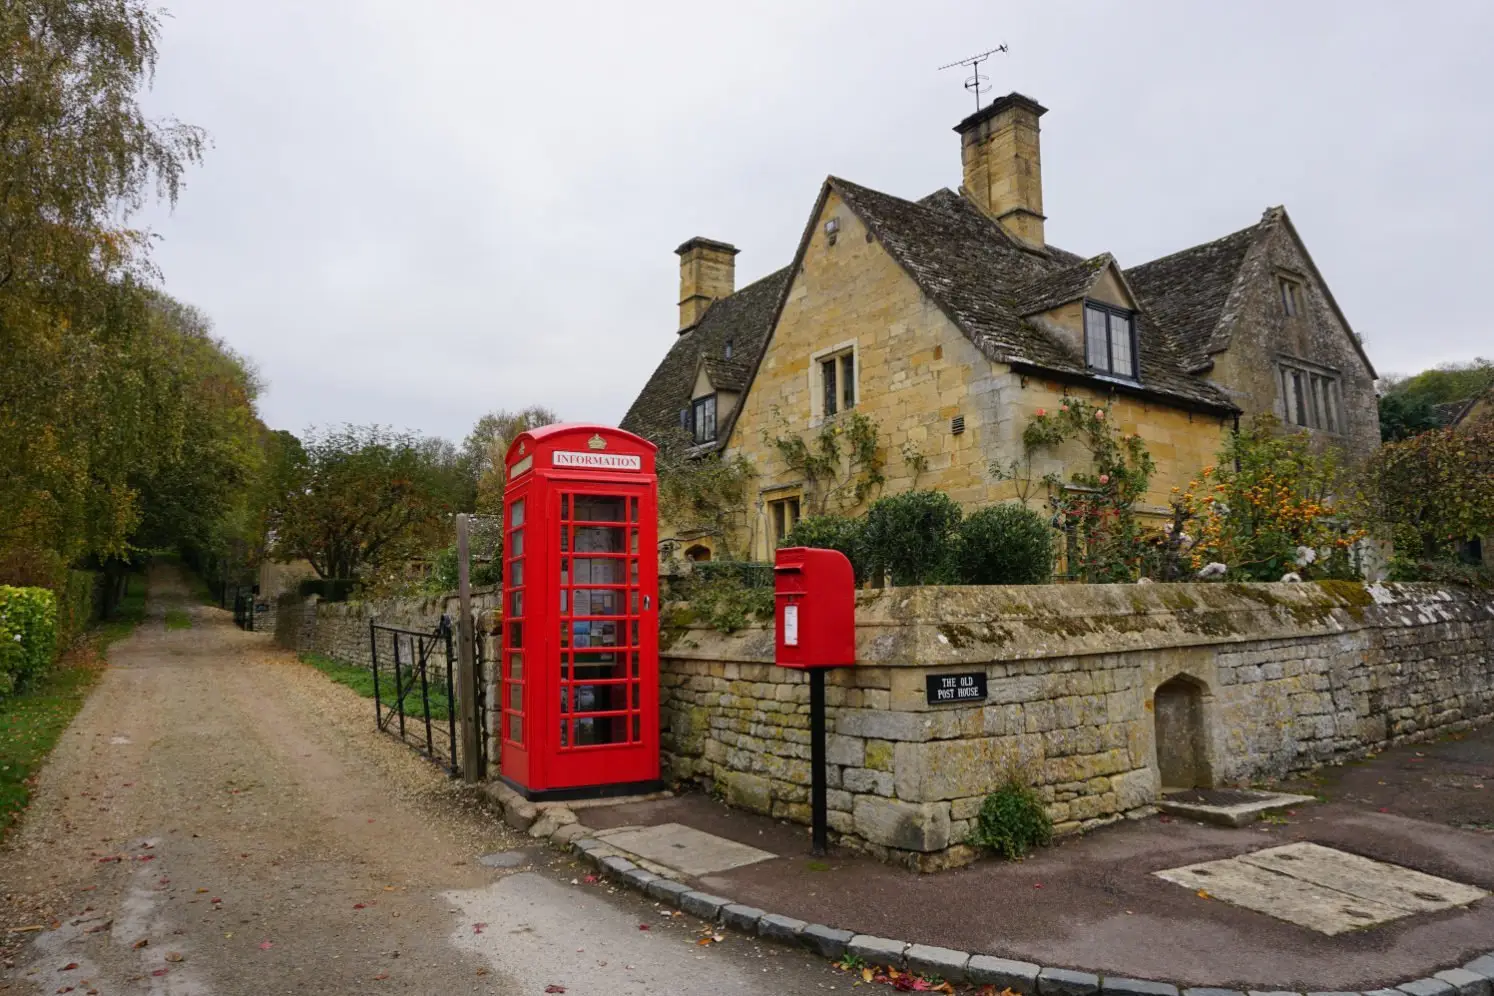 Bright red telephone box and post box contrast against the honey-coloured Cotswold cottage in Stanton